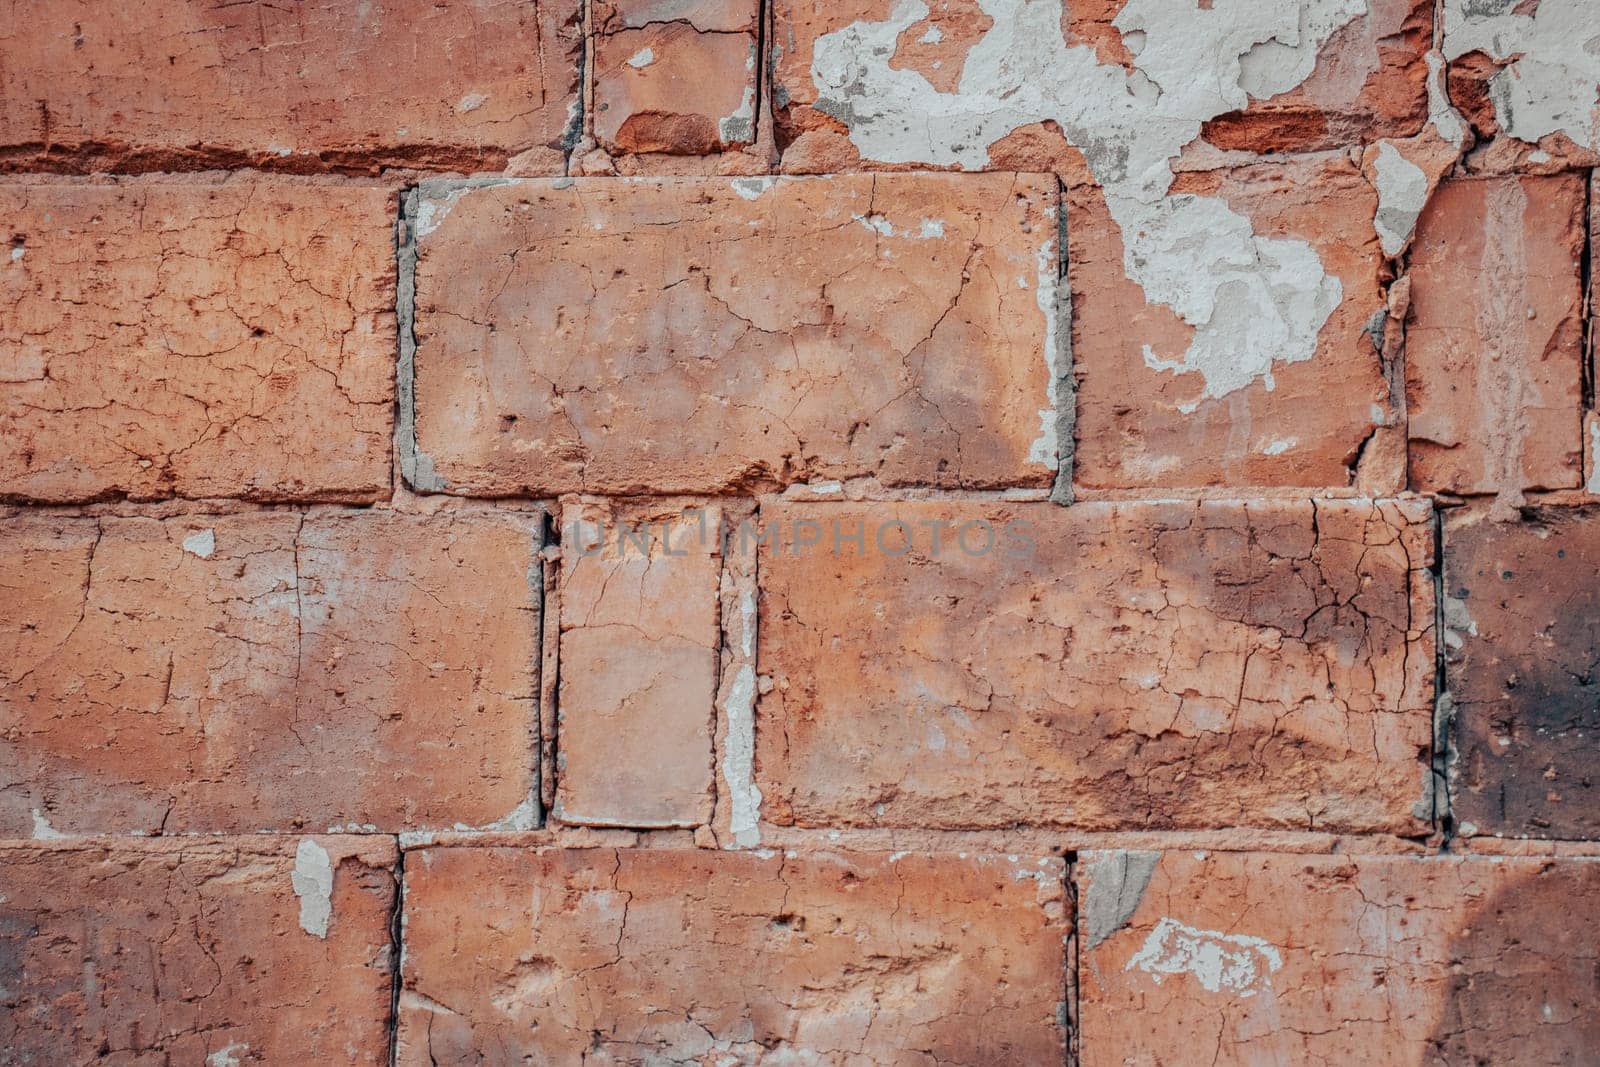 Close up red brick texture wall concept photo. Brick walls old architecture, urban city life. District of European town. High quality picture for wallpaper, travel blog.